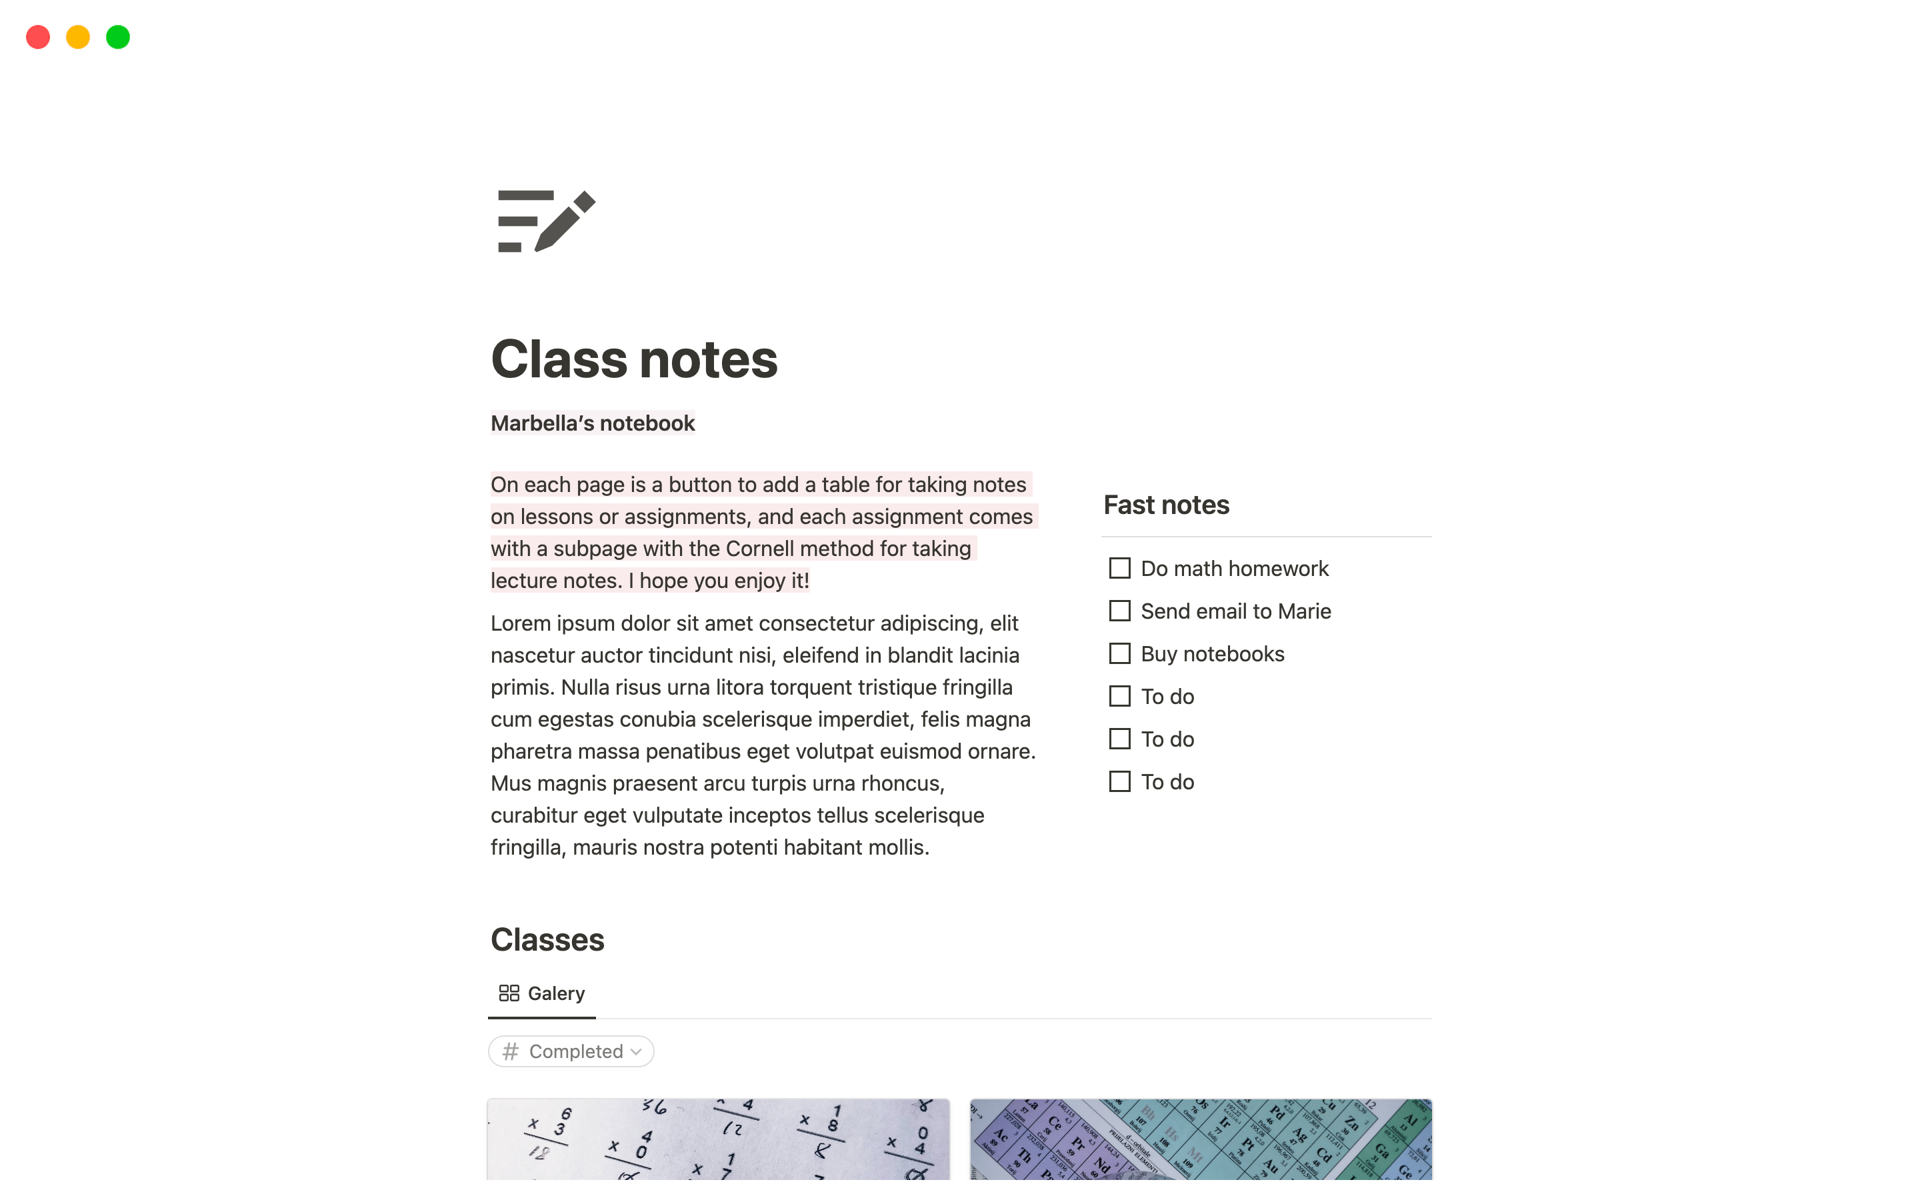 This template is designed to help you in your studies. It is organized by classes and lessons.